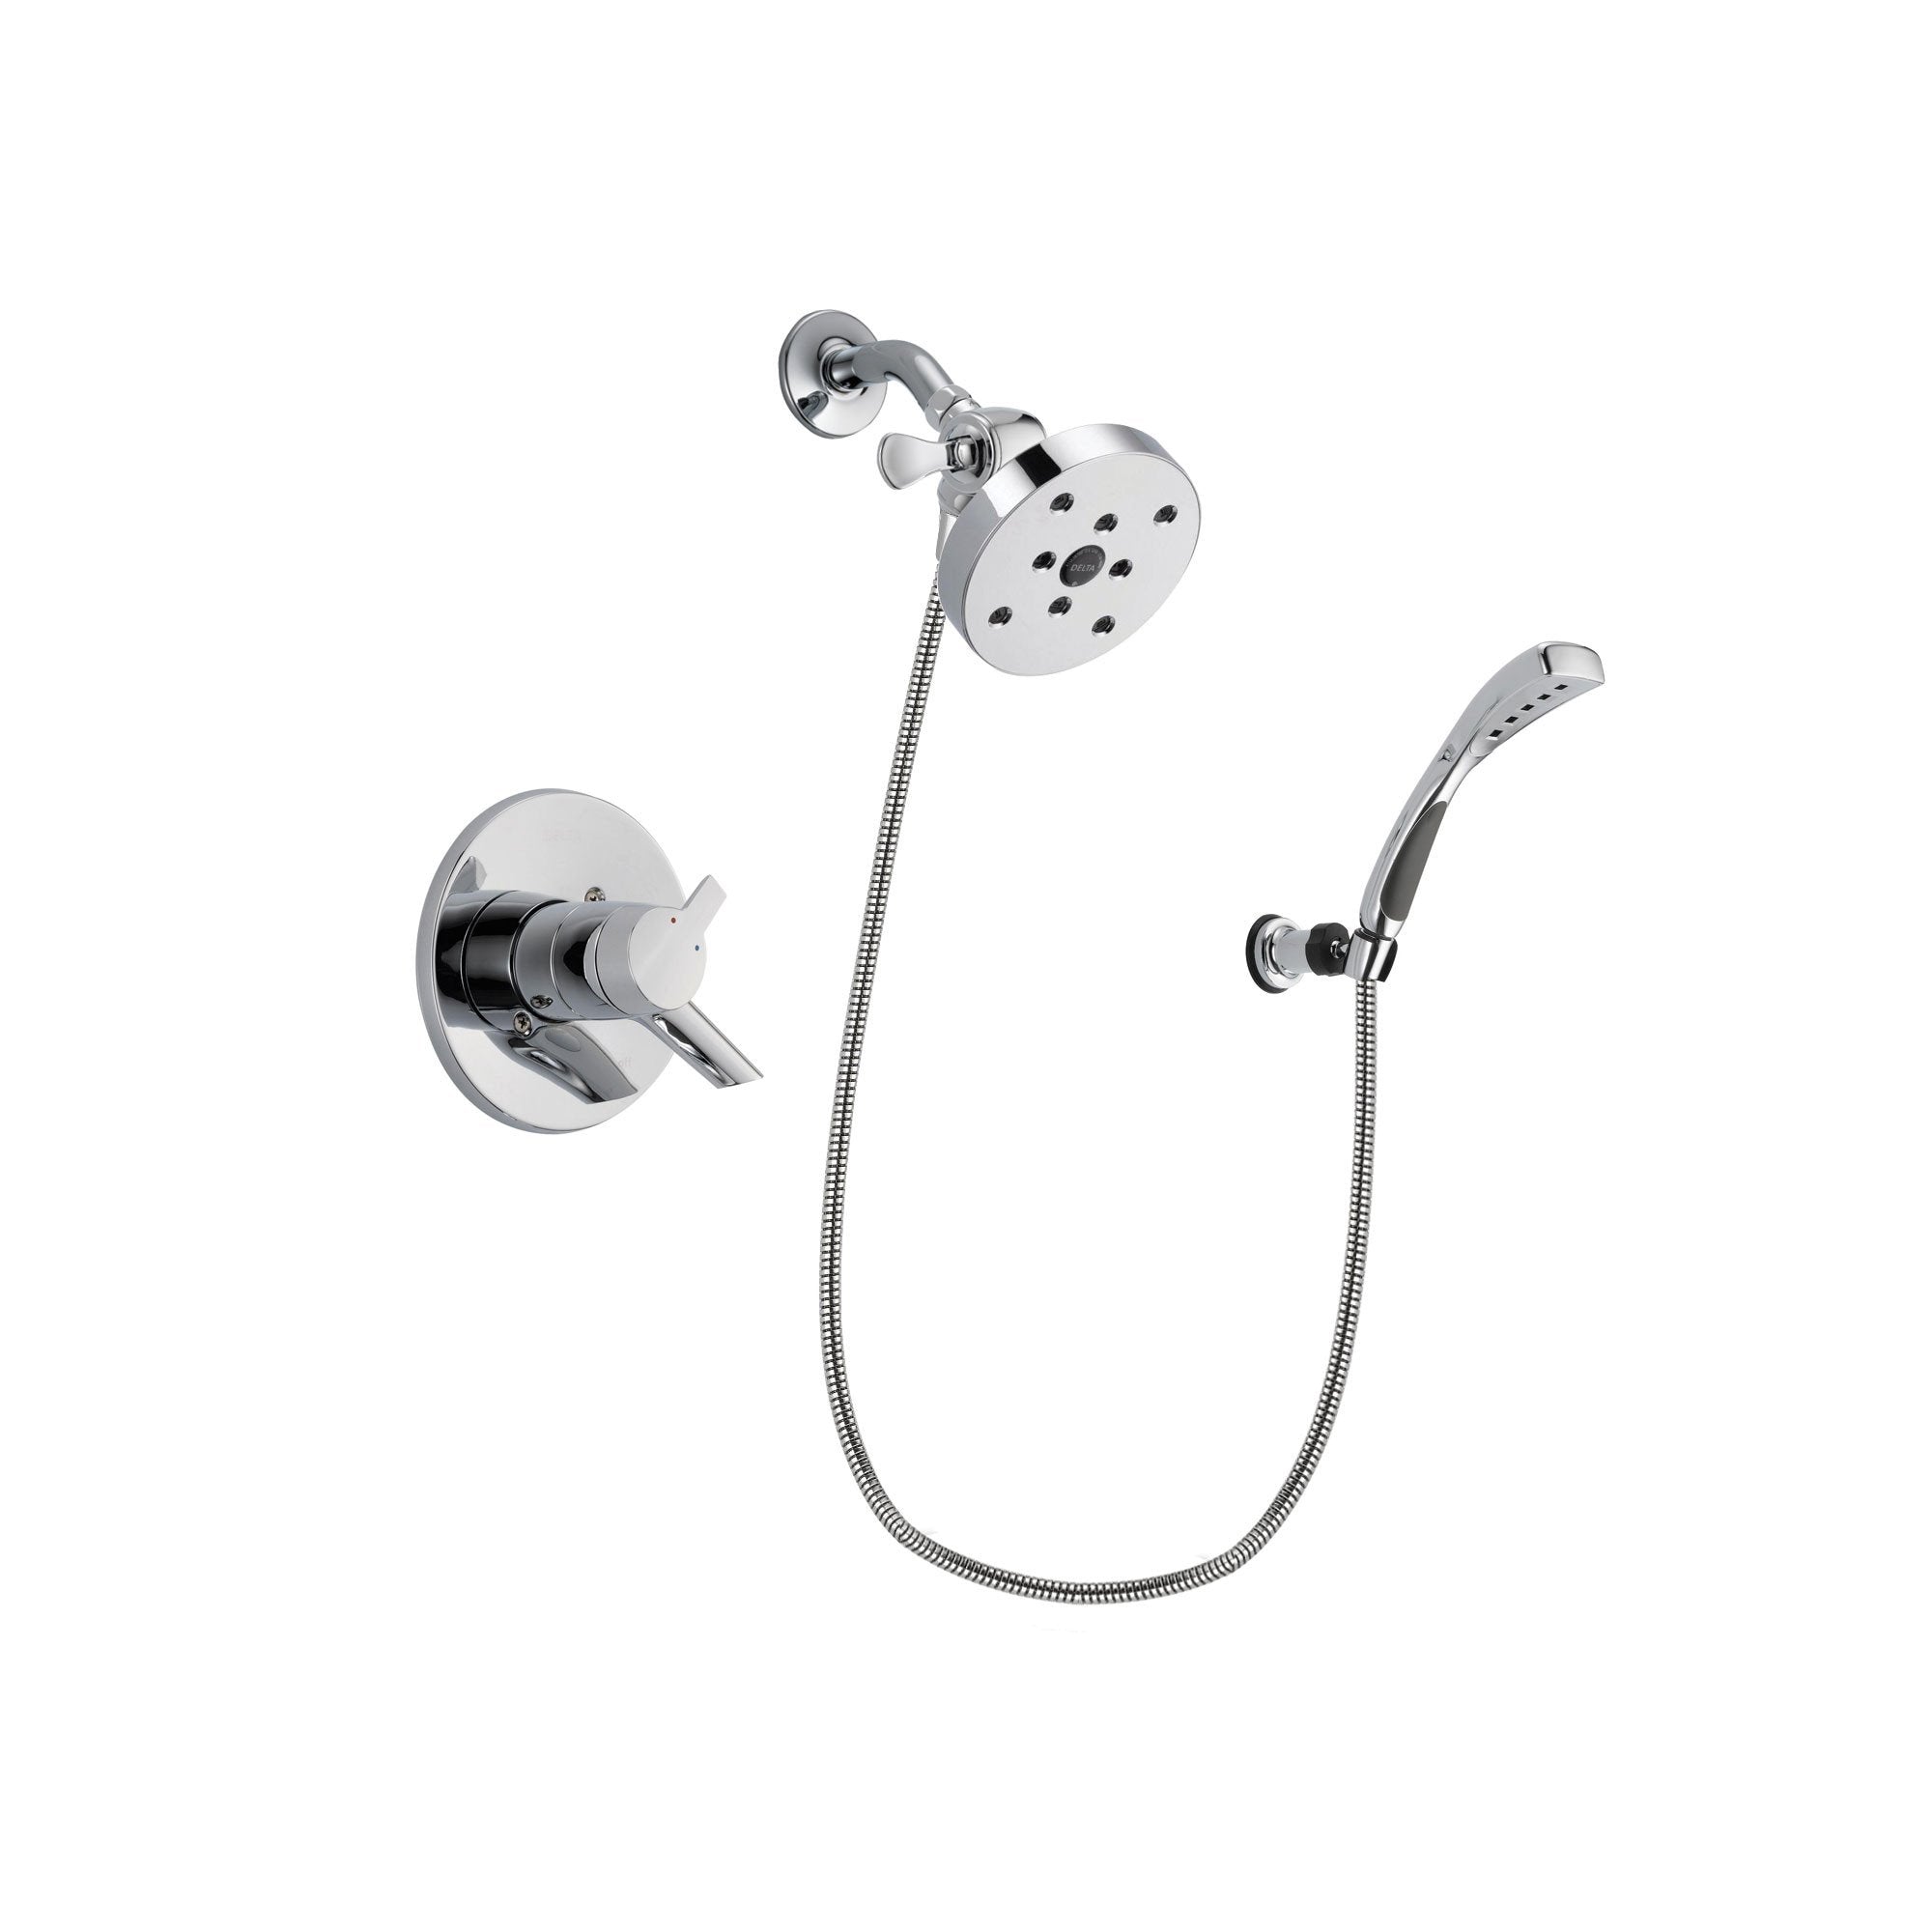 Delta Compel Chrome Finish Dual Control Shower Faucet System Package with 5-1/2 inch Shower Head and Wall-Mount Bracket with Handheld Shower Spray Includes Rough-in Valve DSP1096V